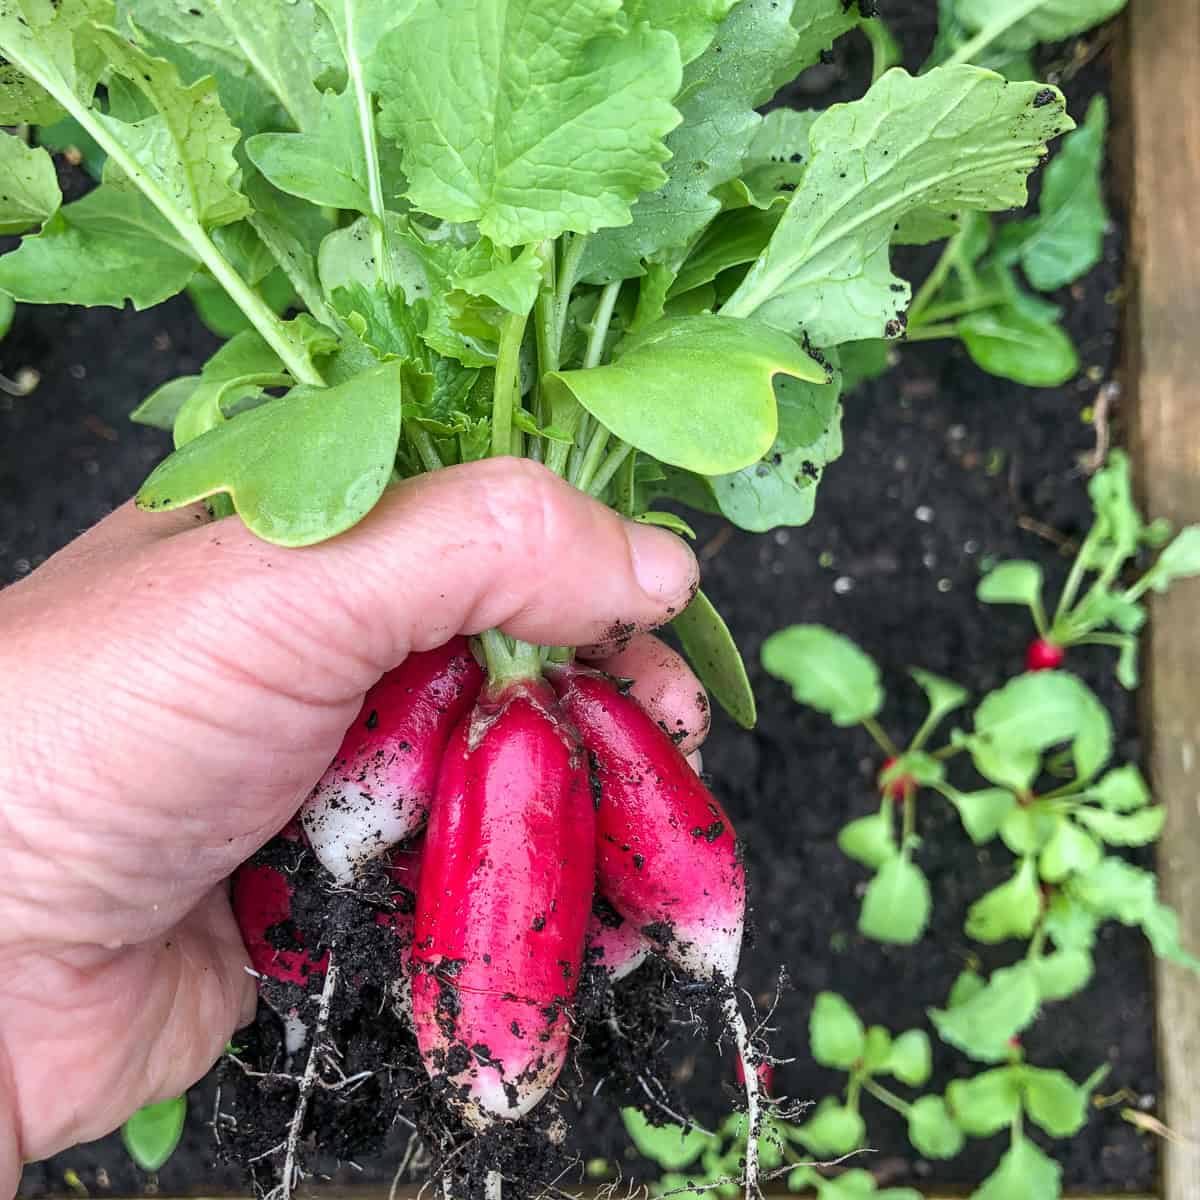 An image of a woman's hand holding a bunch of radishes.